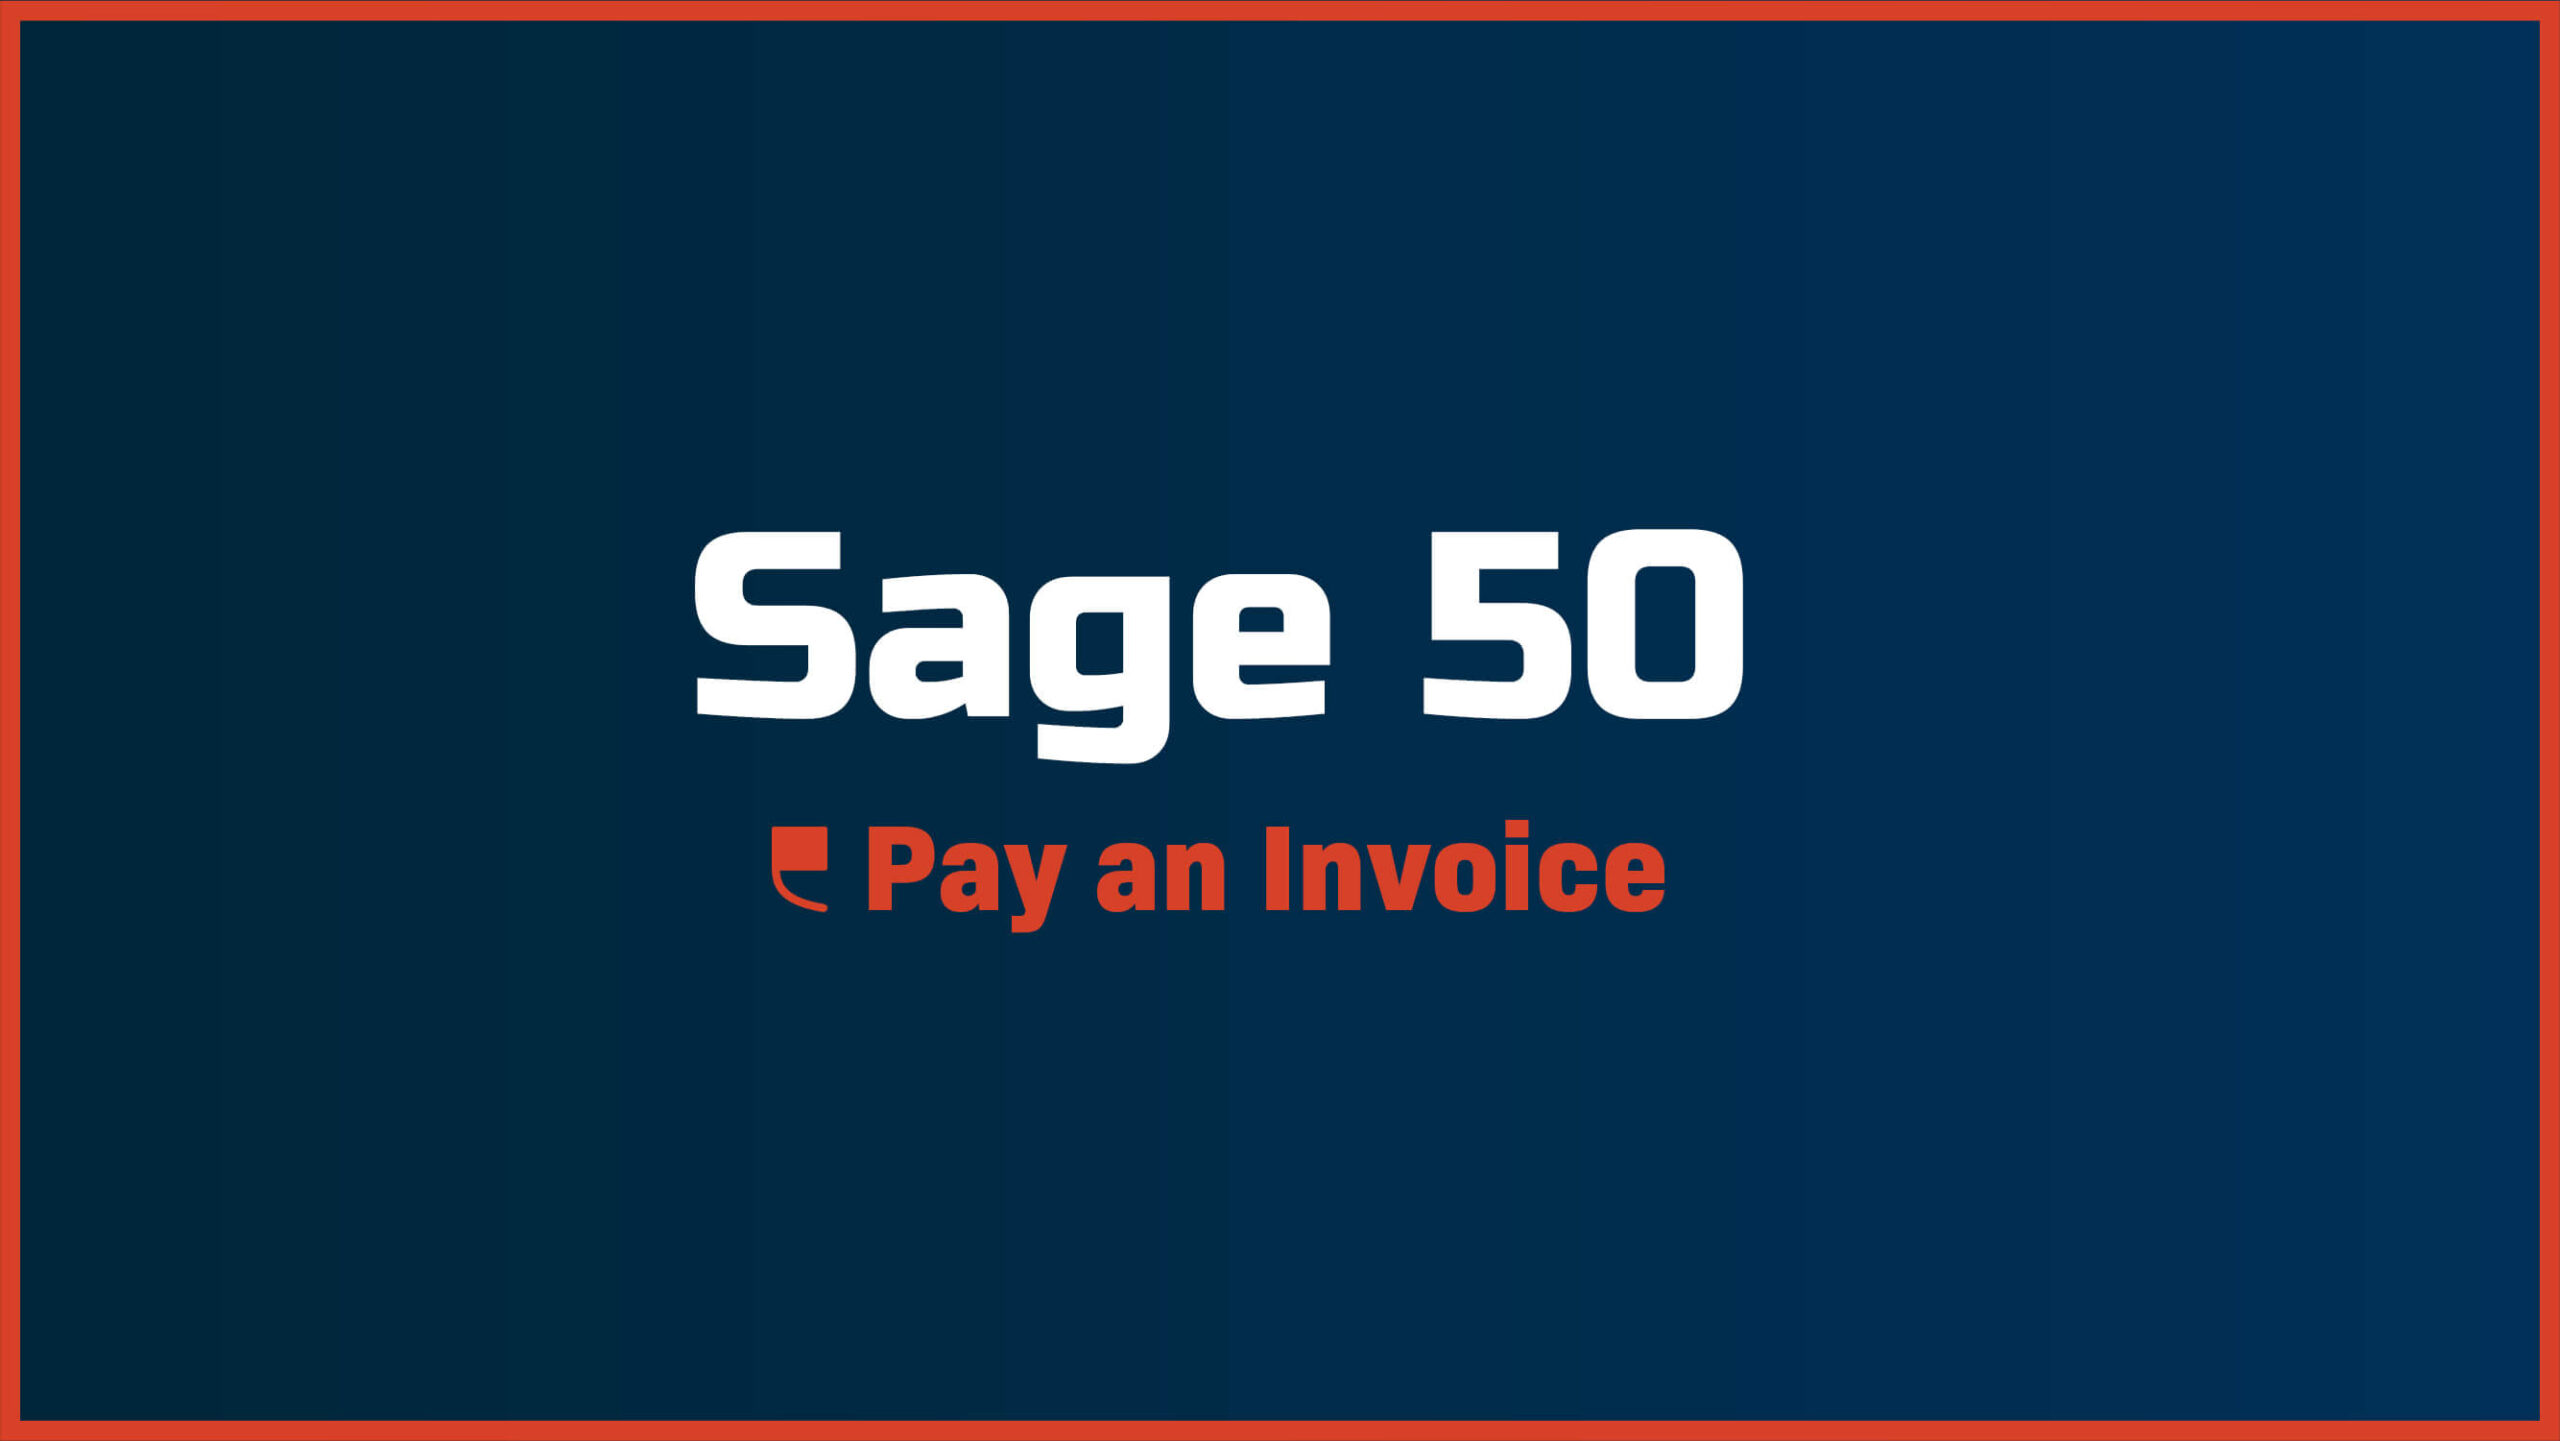 Sage 50 – How to Pay an Invoice - Featured Image